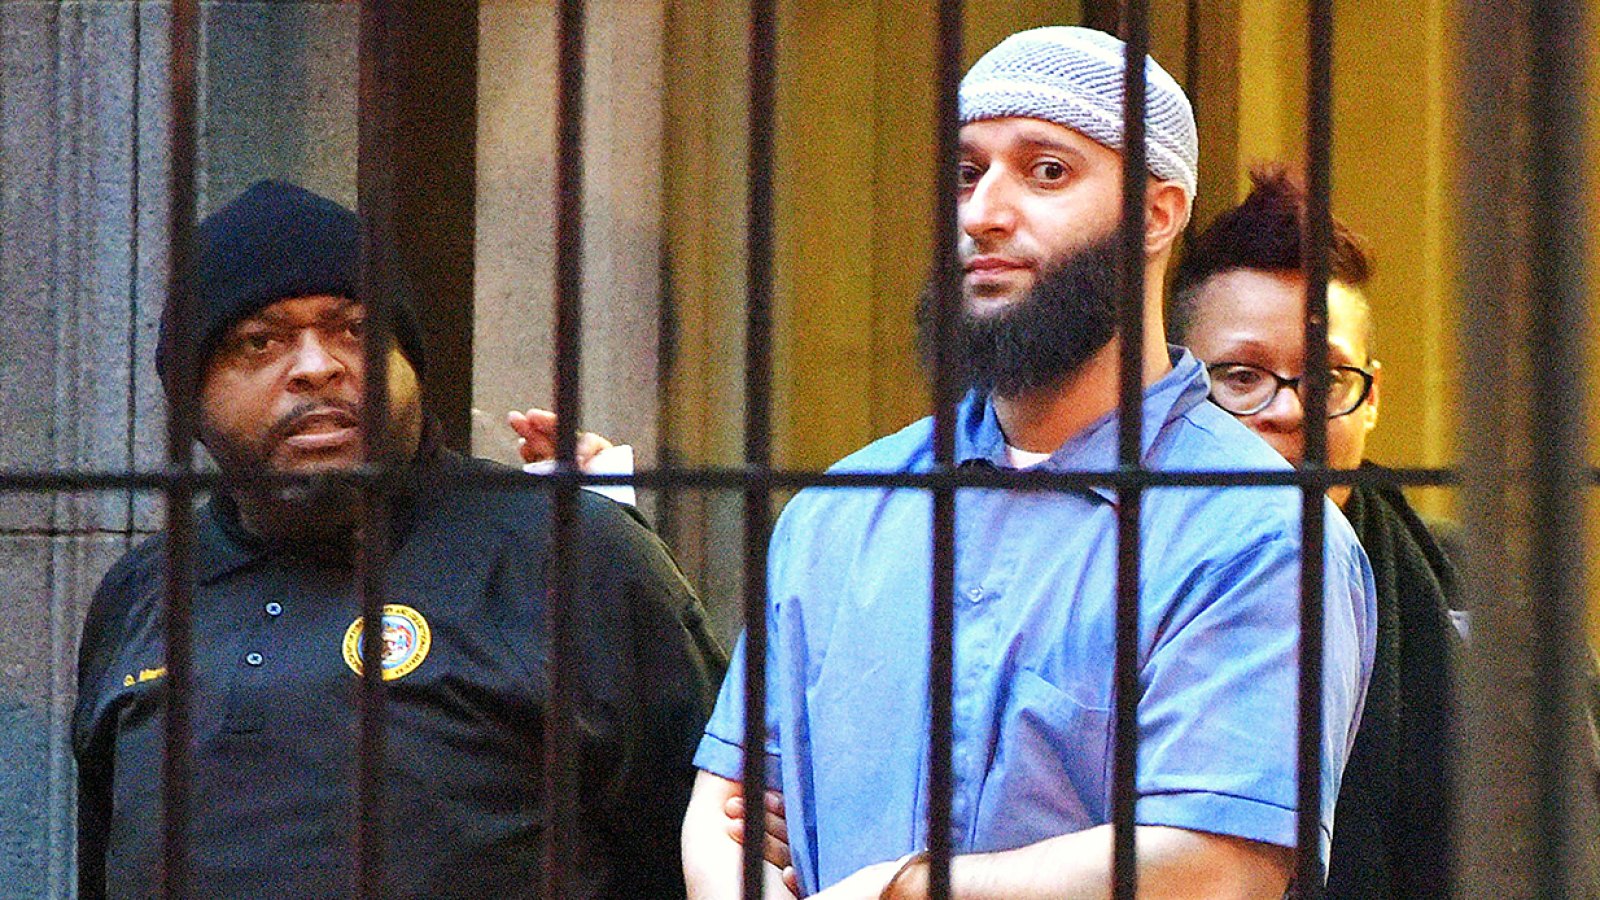 Serial Podcast Subject Adnan Syed Granted New Trial